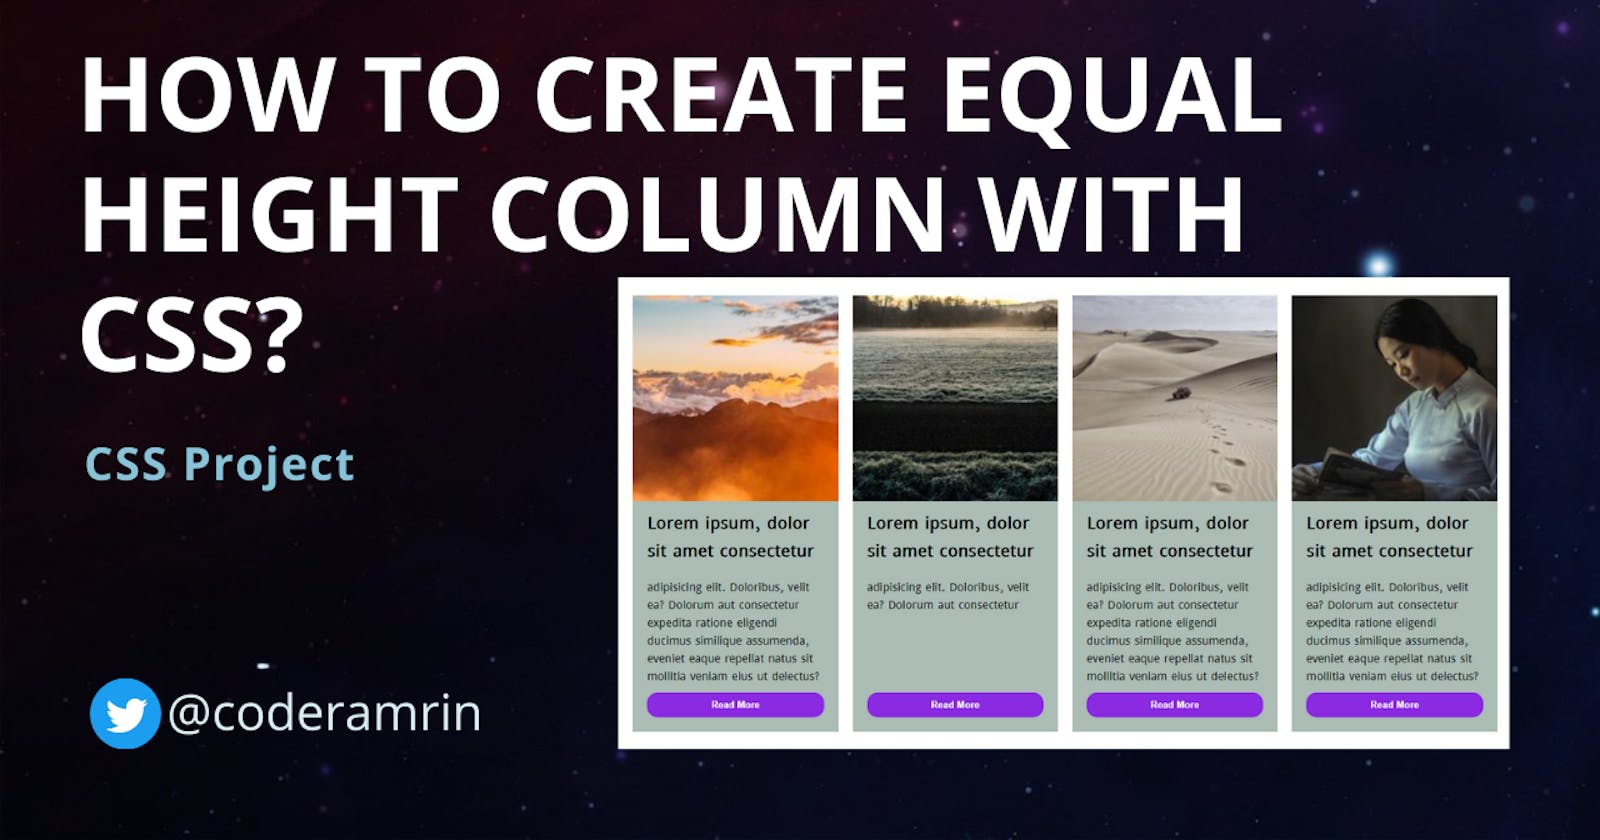 How to create an equal height column with CSS